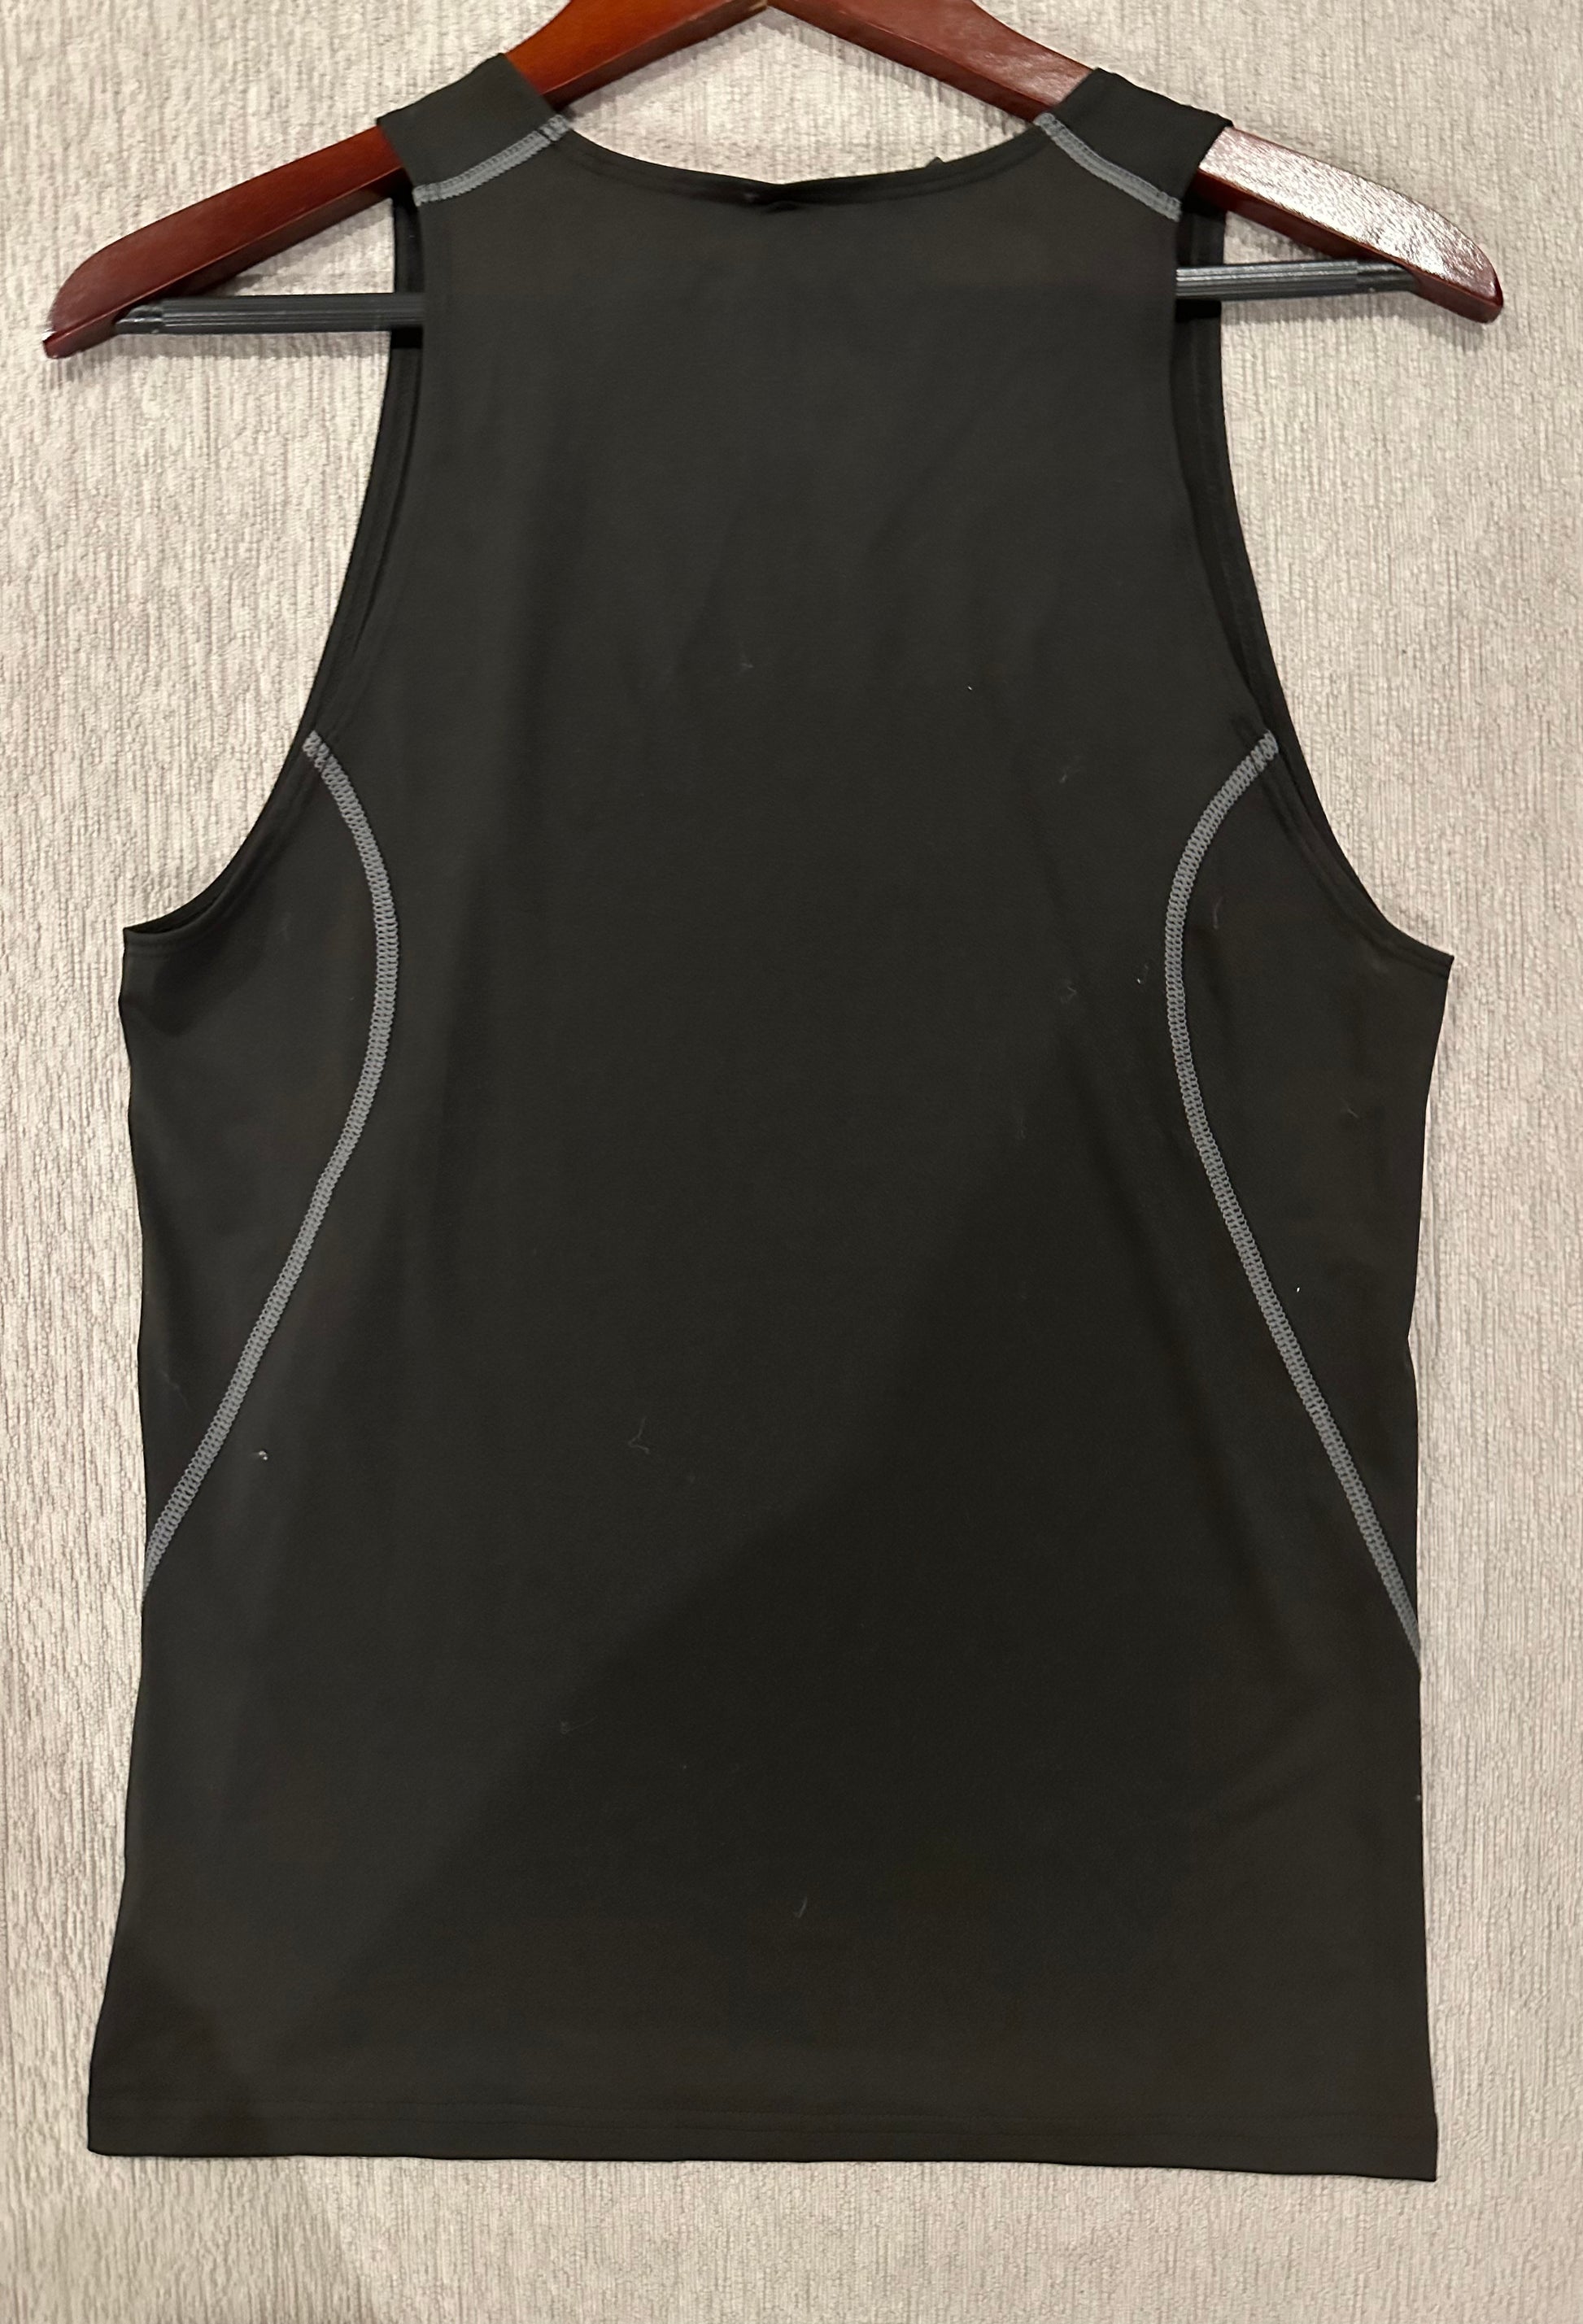 NIKE PRO HYPERSTRONG Padded Compression Basketball Tank Black/Blue